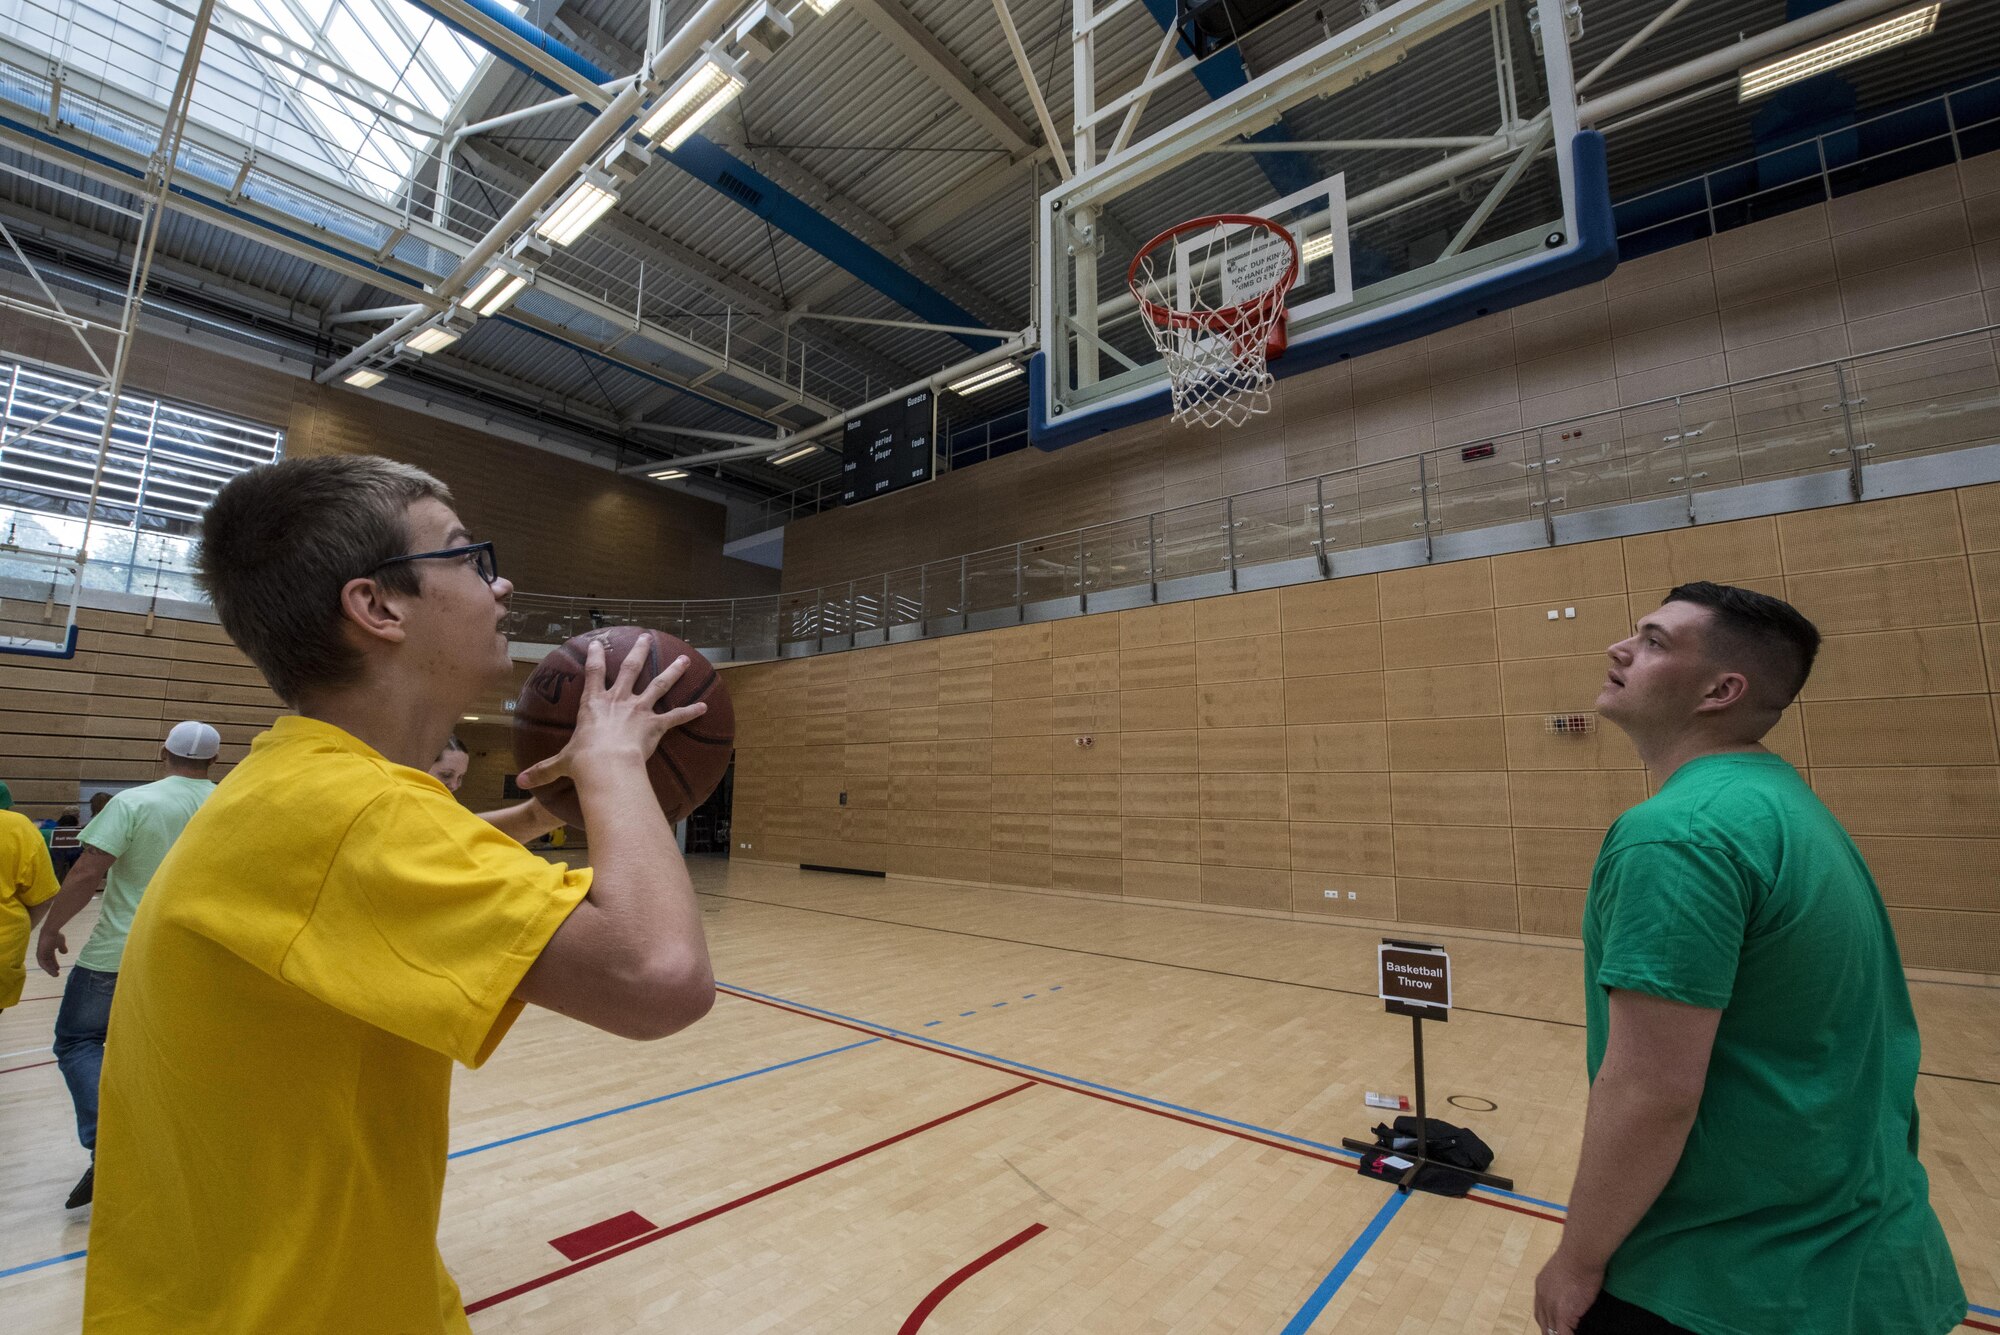 A student prepares to shoot a basketball during the St. Martins Special Children's Day at Spangdahlem Air Base, Germany, June 28, 2017. St. Martins School and Spangdahlem students paired up with volunteers to engage in activities that were meant to be both challenging and fun. (U.S. Air Force photo by Senior Airman Preston Cherry)